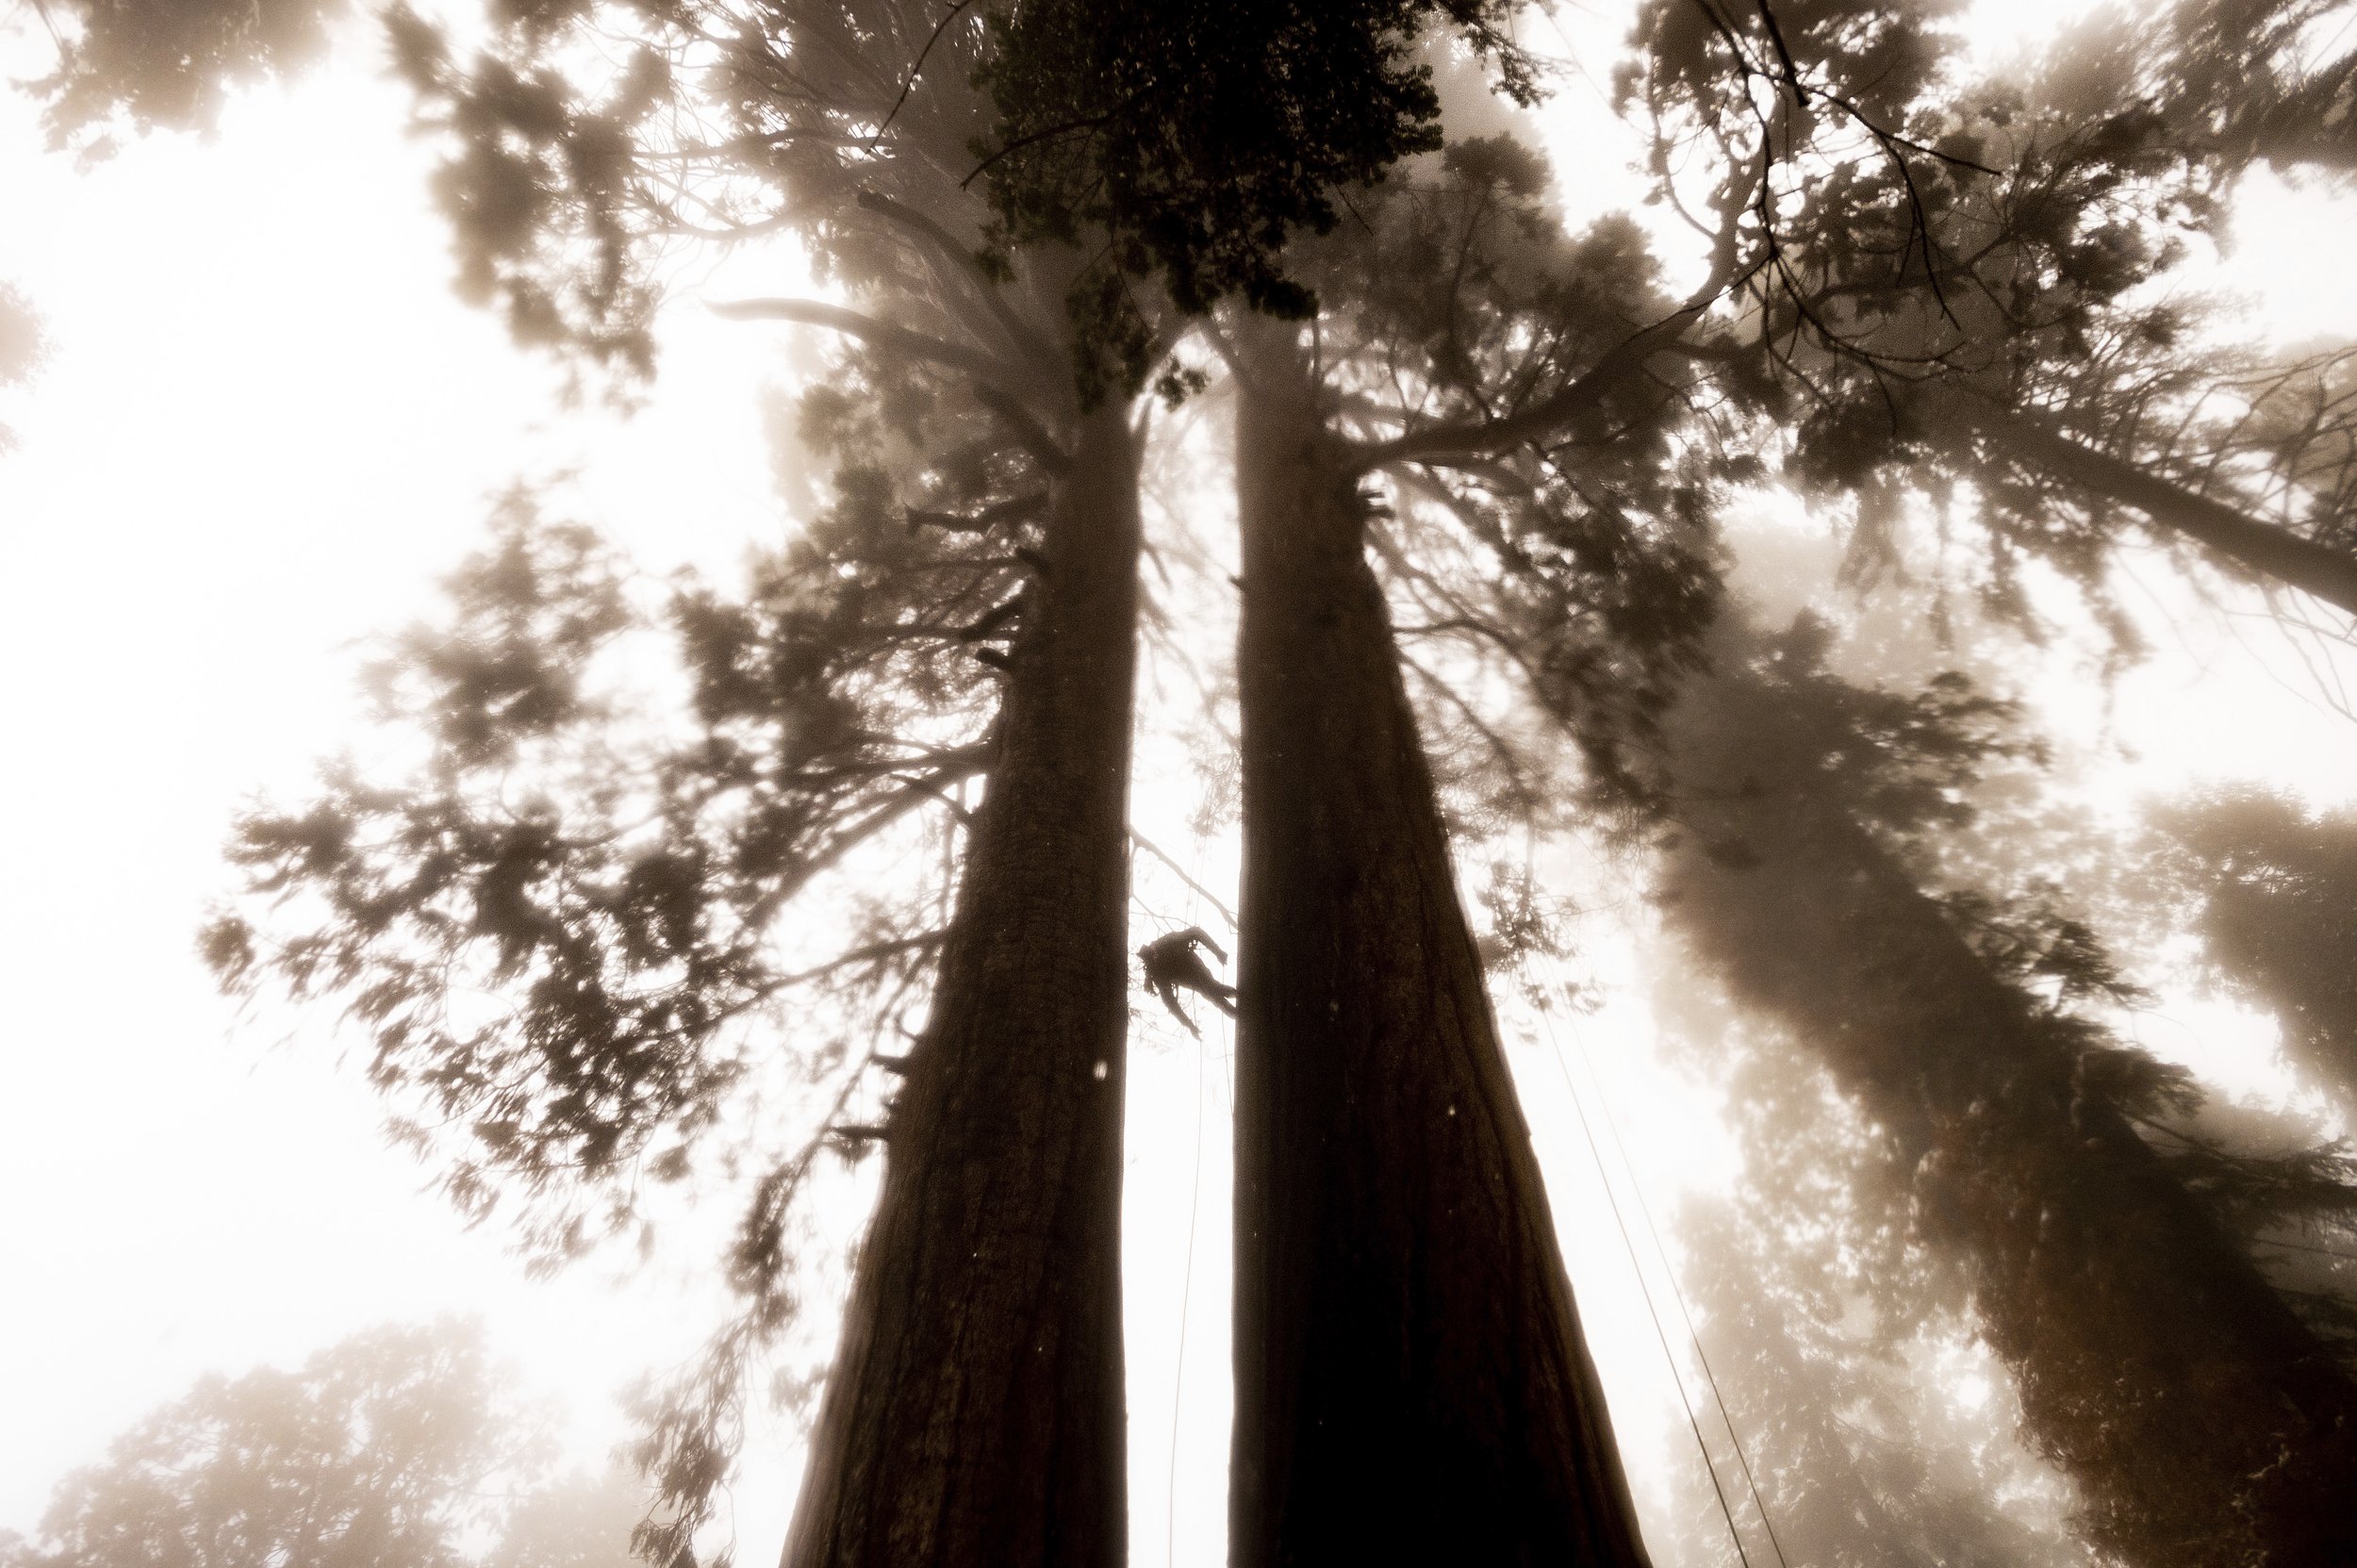  Climbing assistant Lawrence Schultz ascends the Three Sisters sequoia tree during an Archangel Ancient Tree Archive expedition to plant sequoia seedlings, on Oct. 26, 2021, in Sequoia Crest, Calif. The group hopes to preserve the genetics of giant s